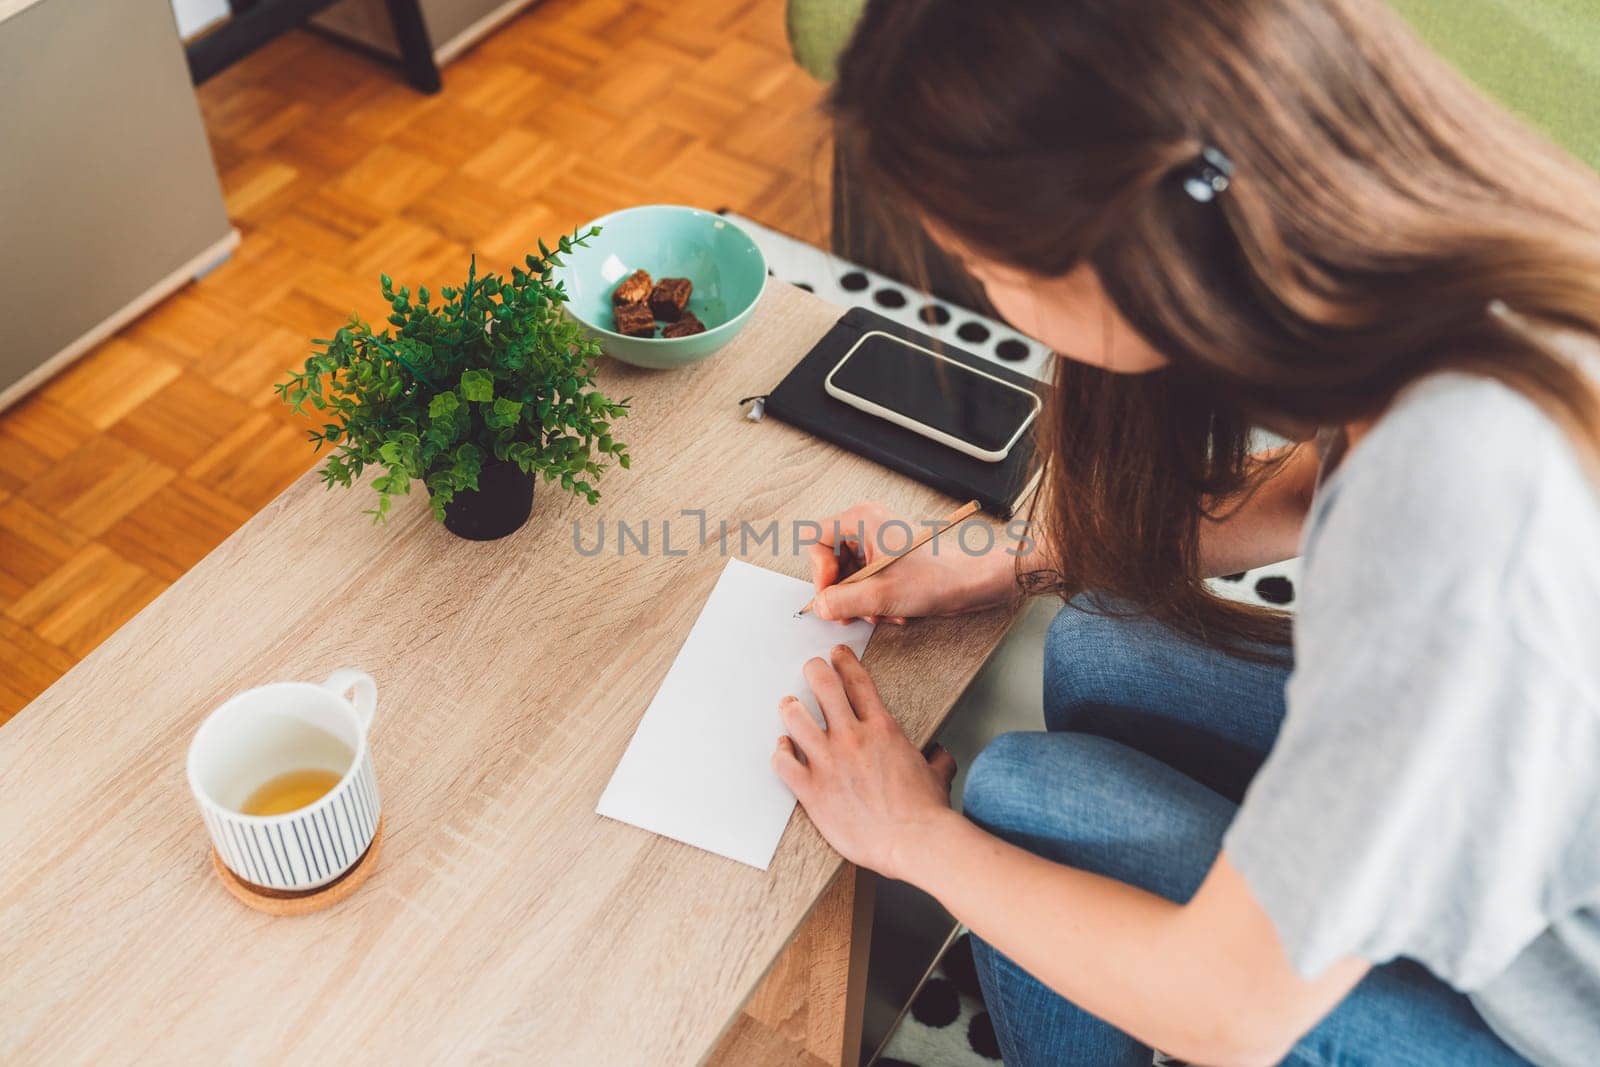 Young caucasian woman with long brown hair in jeans working from home, writing notes. Cheerful woman student studying at home.